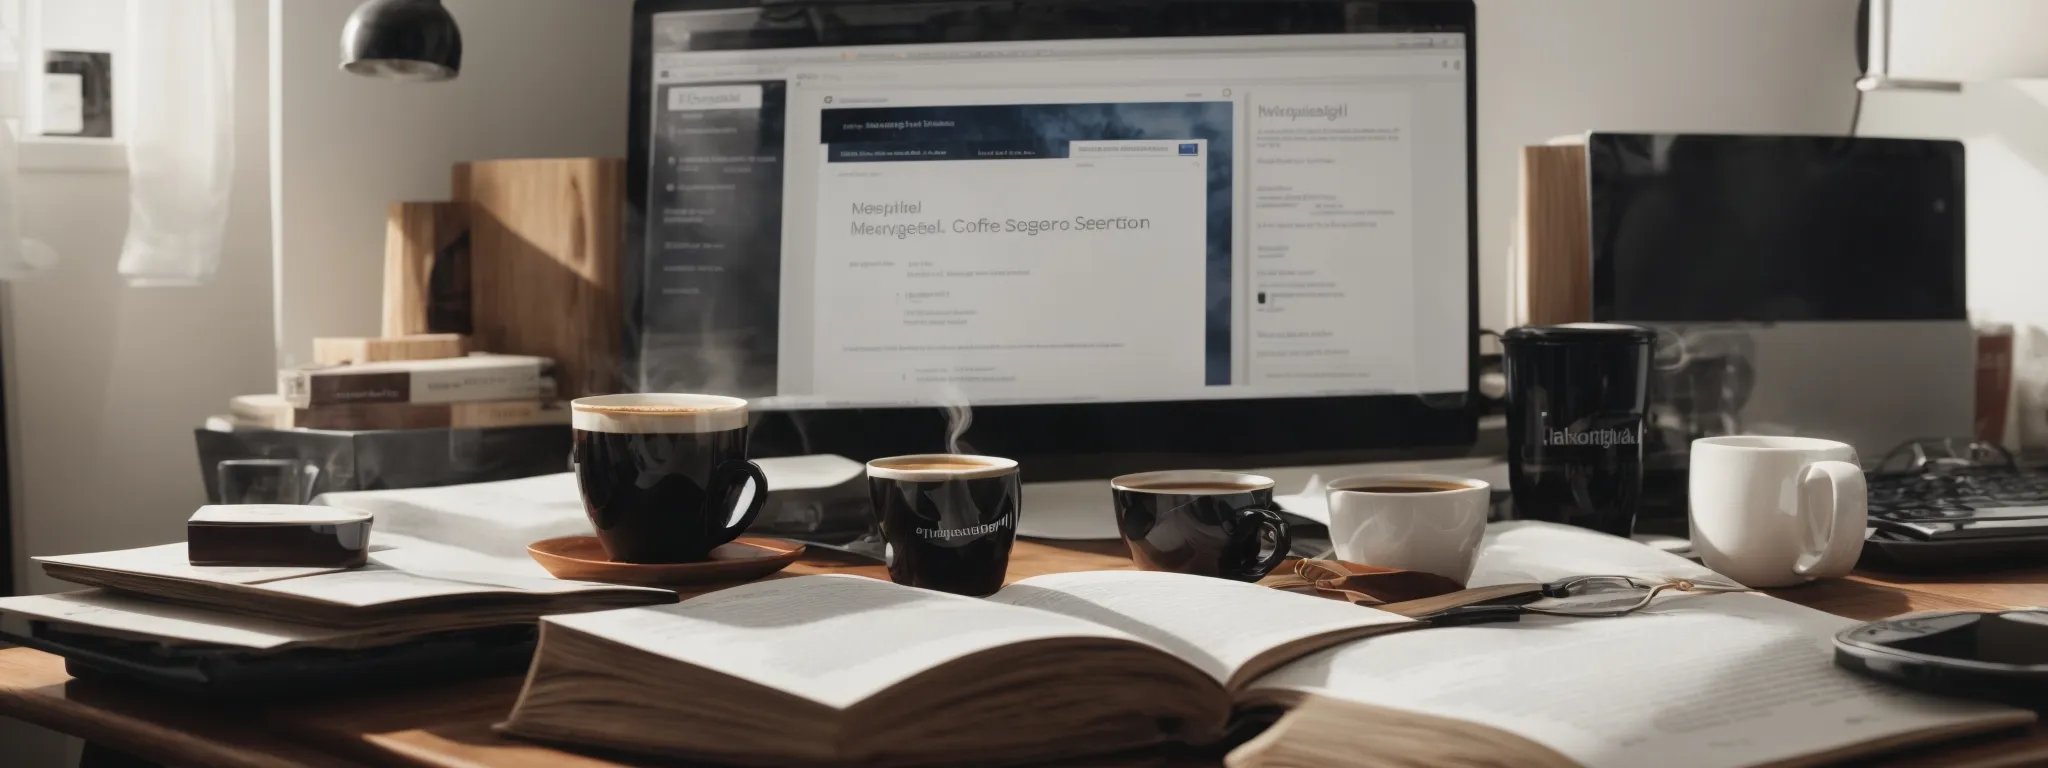 a desktop with a marketing strategy book, a cup of coffee, and a computer displaying search engine results.